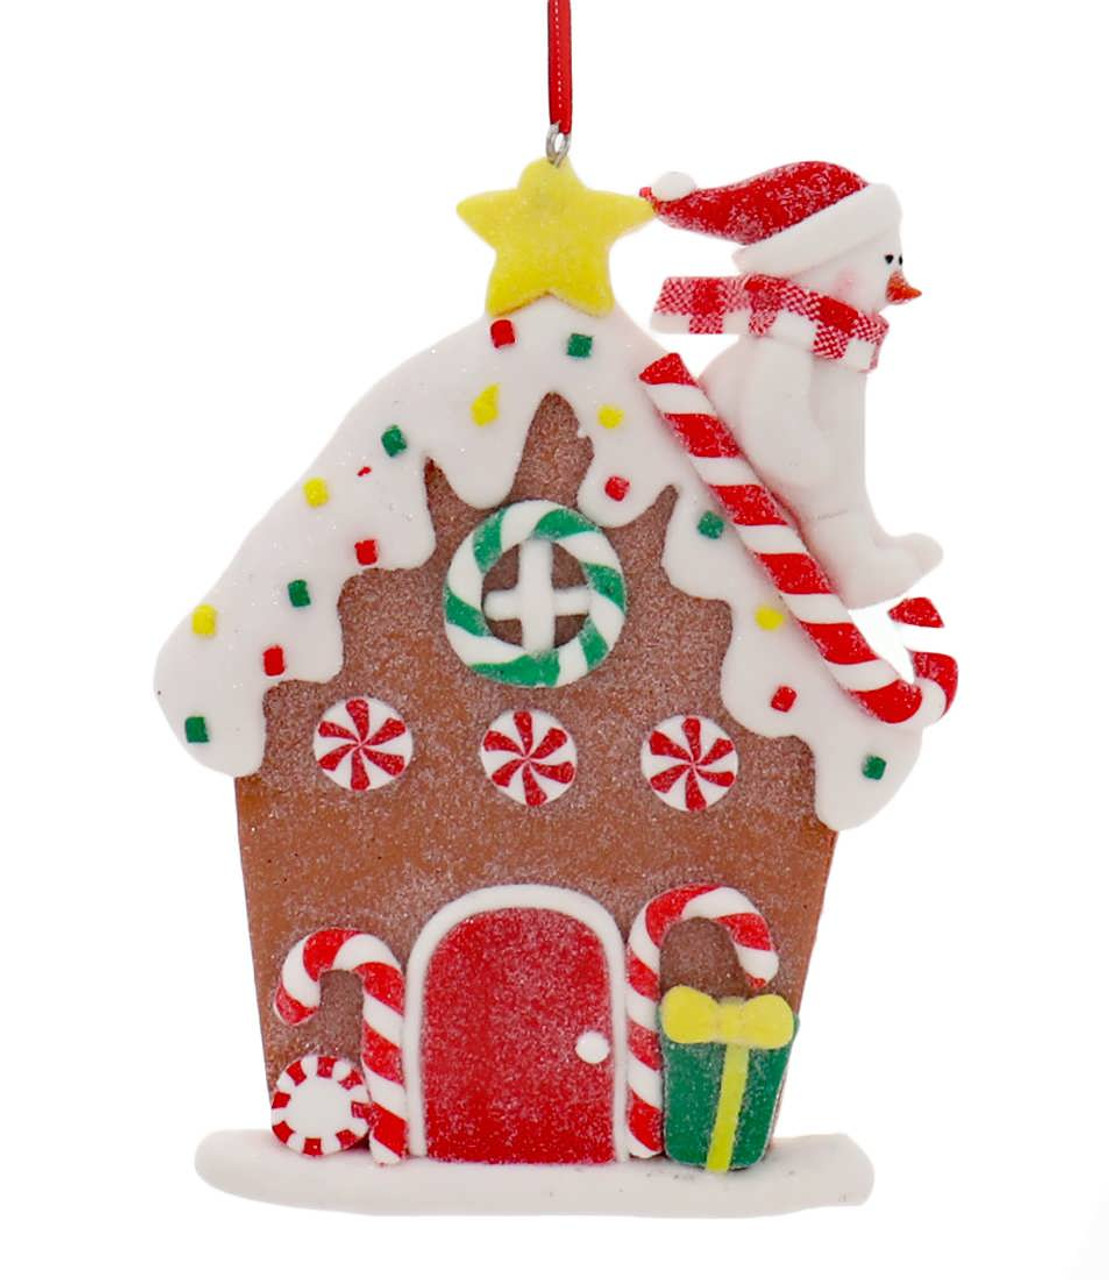 It's Hard To Find Good Neighbors Like You - Neighbor Ornament - Gingerbread  Houses - C249